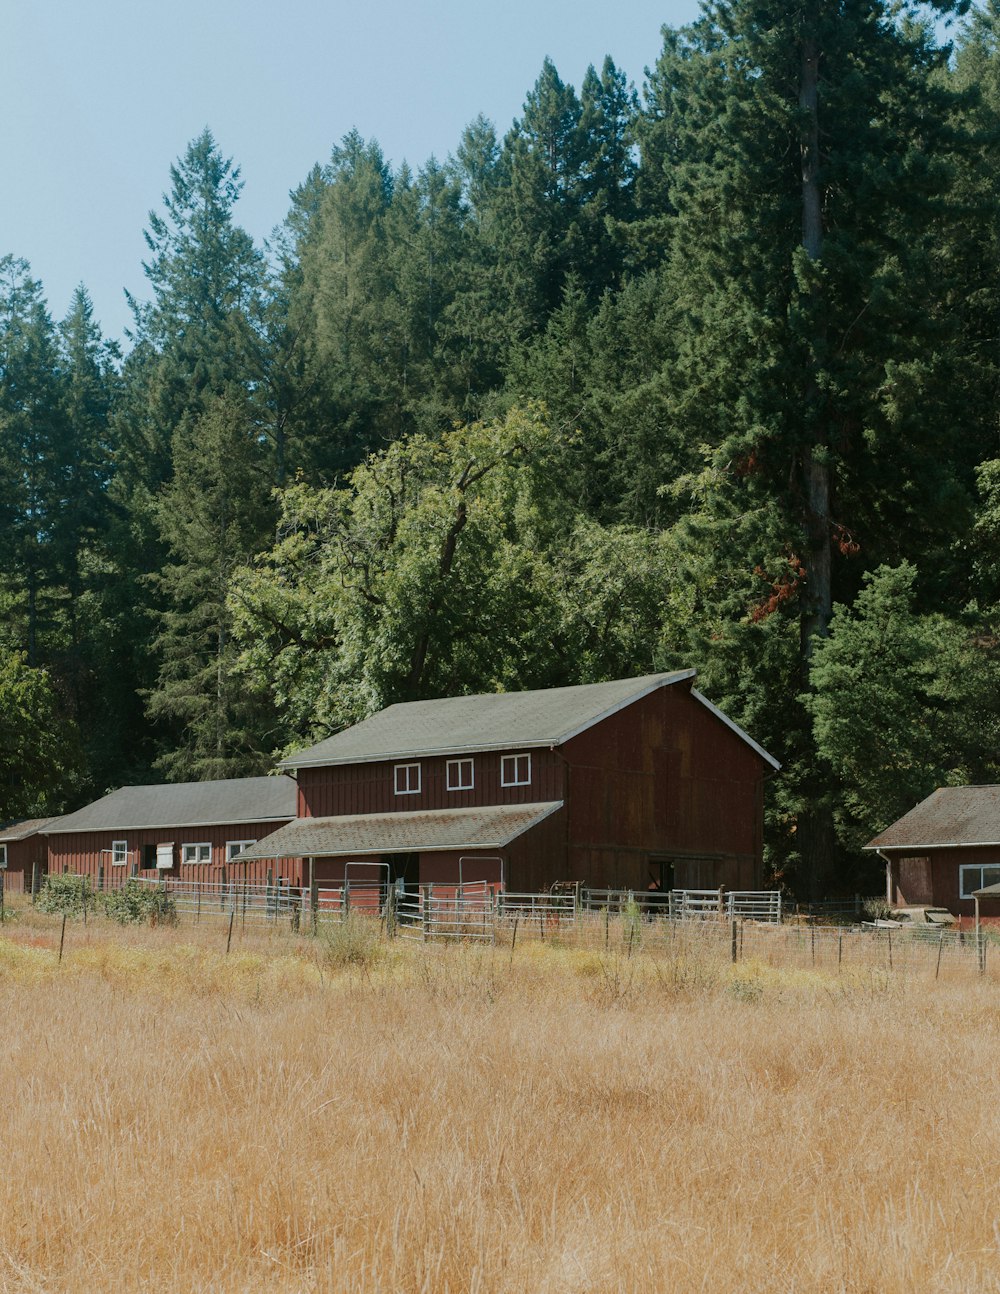 a couple of red barns sitting next to a forest